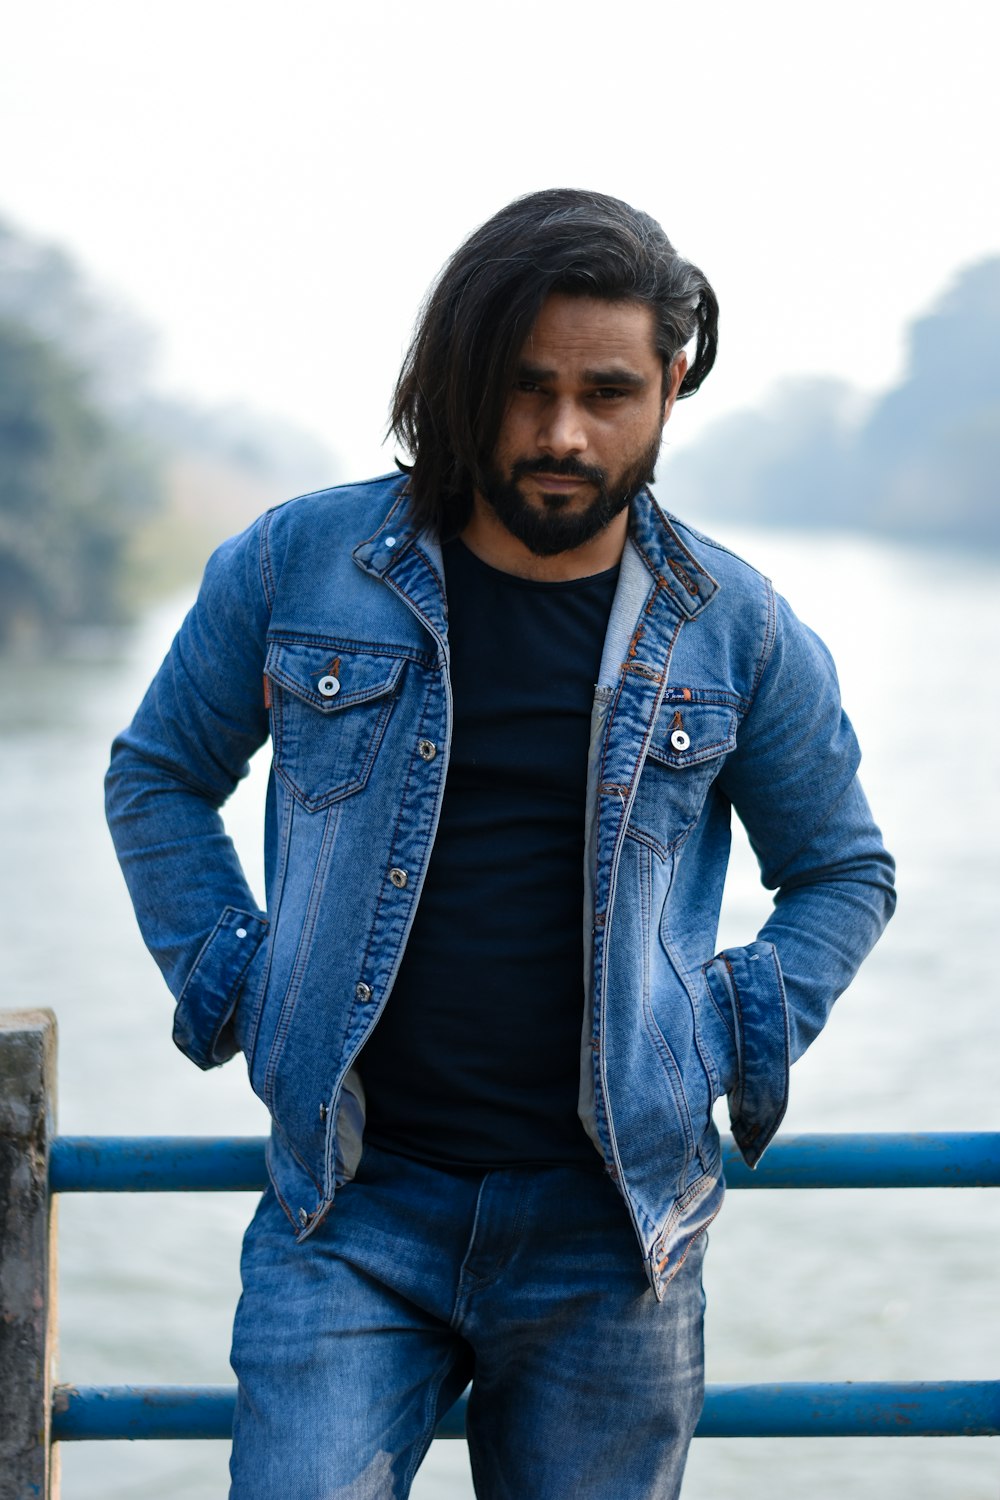 a man with long hair wearing a denim jacket